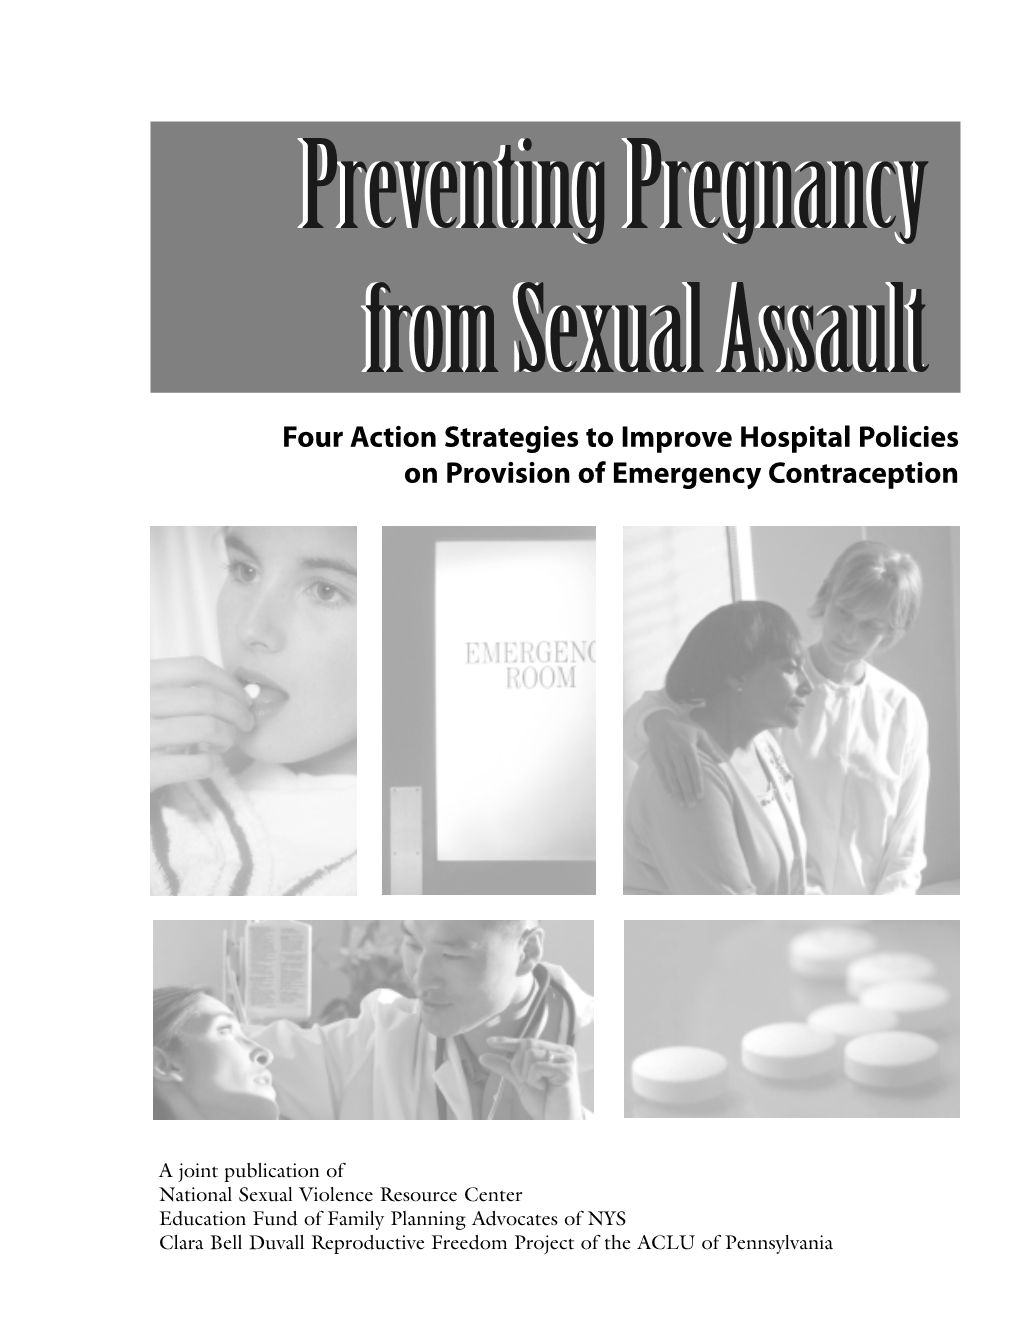 Preventing Pregnancy from Sexual Assault, and Stressed the Fact That EC Is More Effective the Sooner It Is Taken